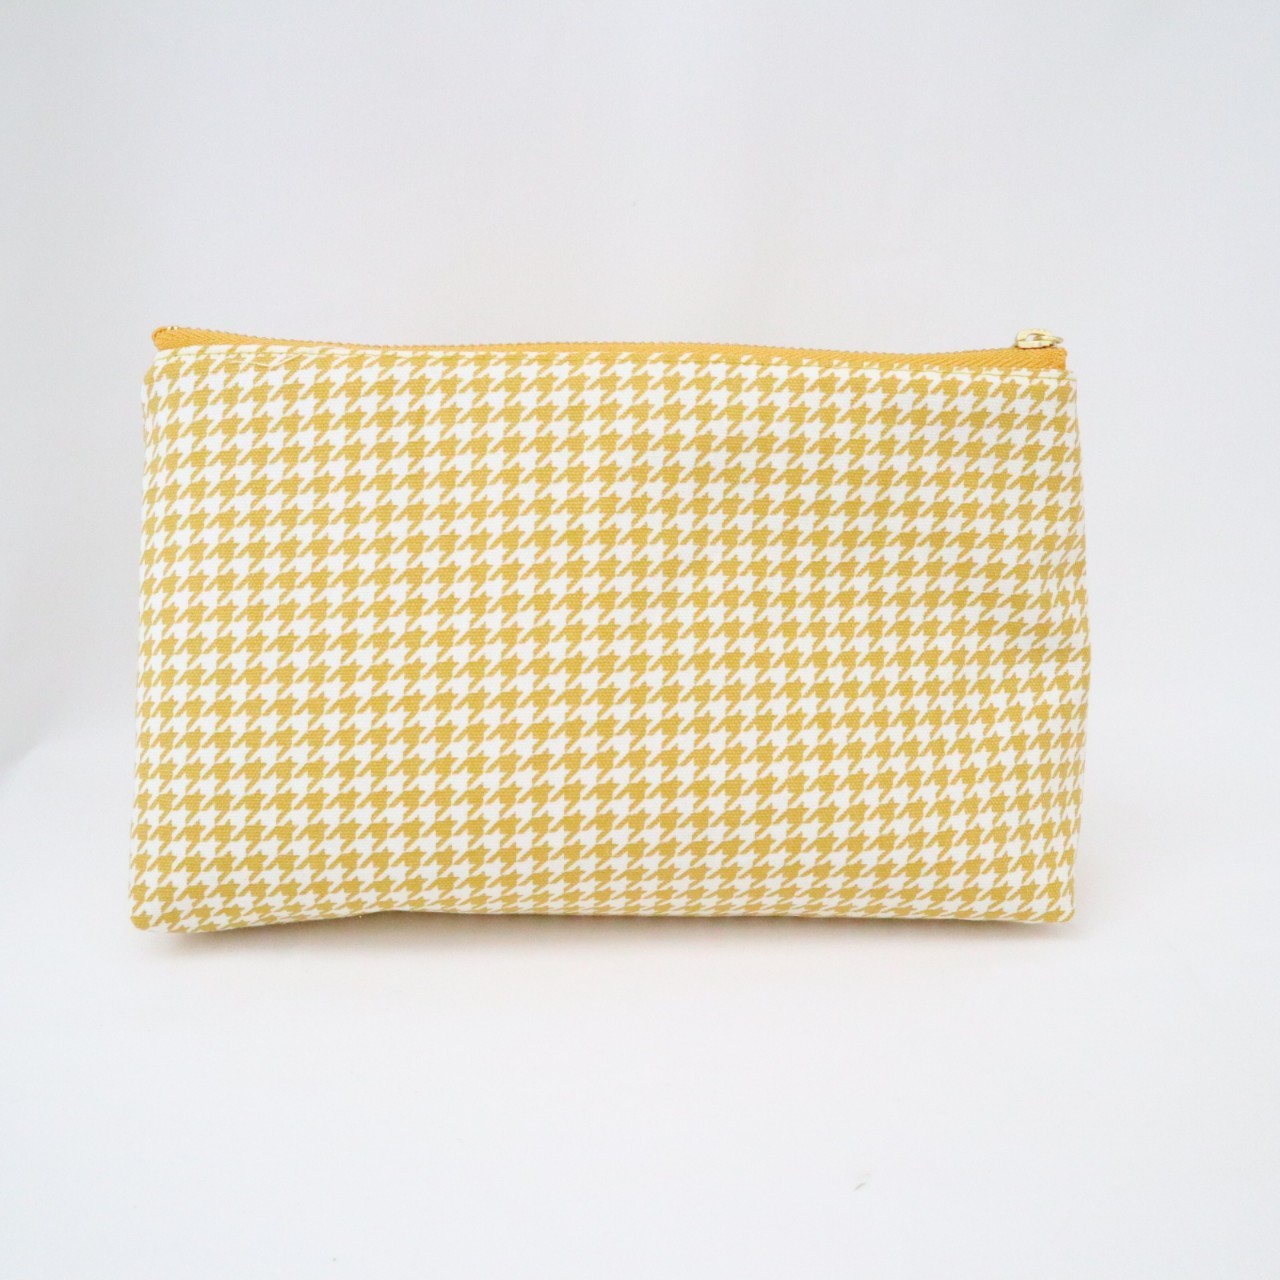 &lt;butter_mary Furi Furi Bag Kit&gt; C houndstooth check yellow / D houndstooth check pink